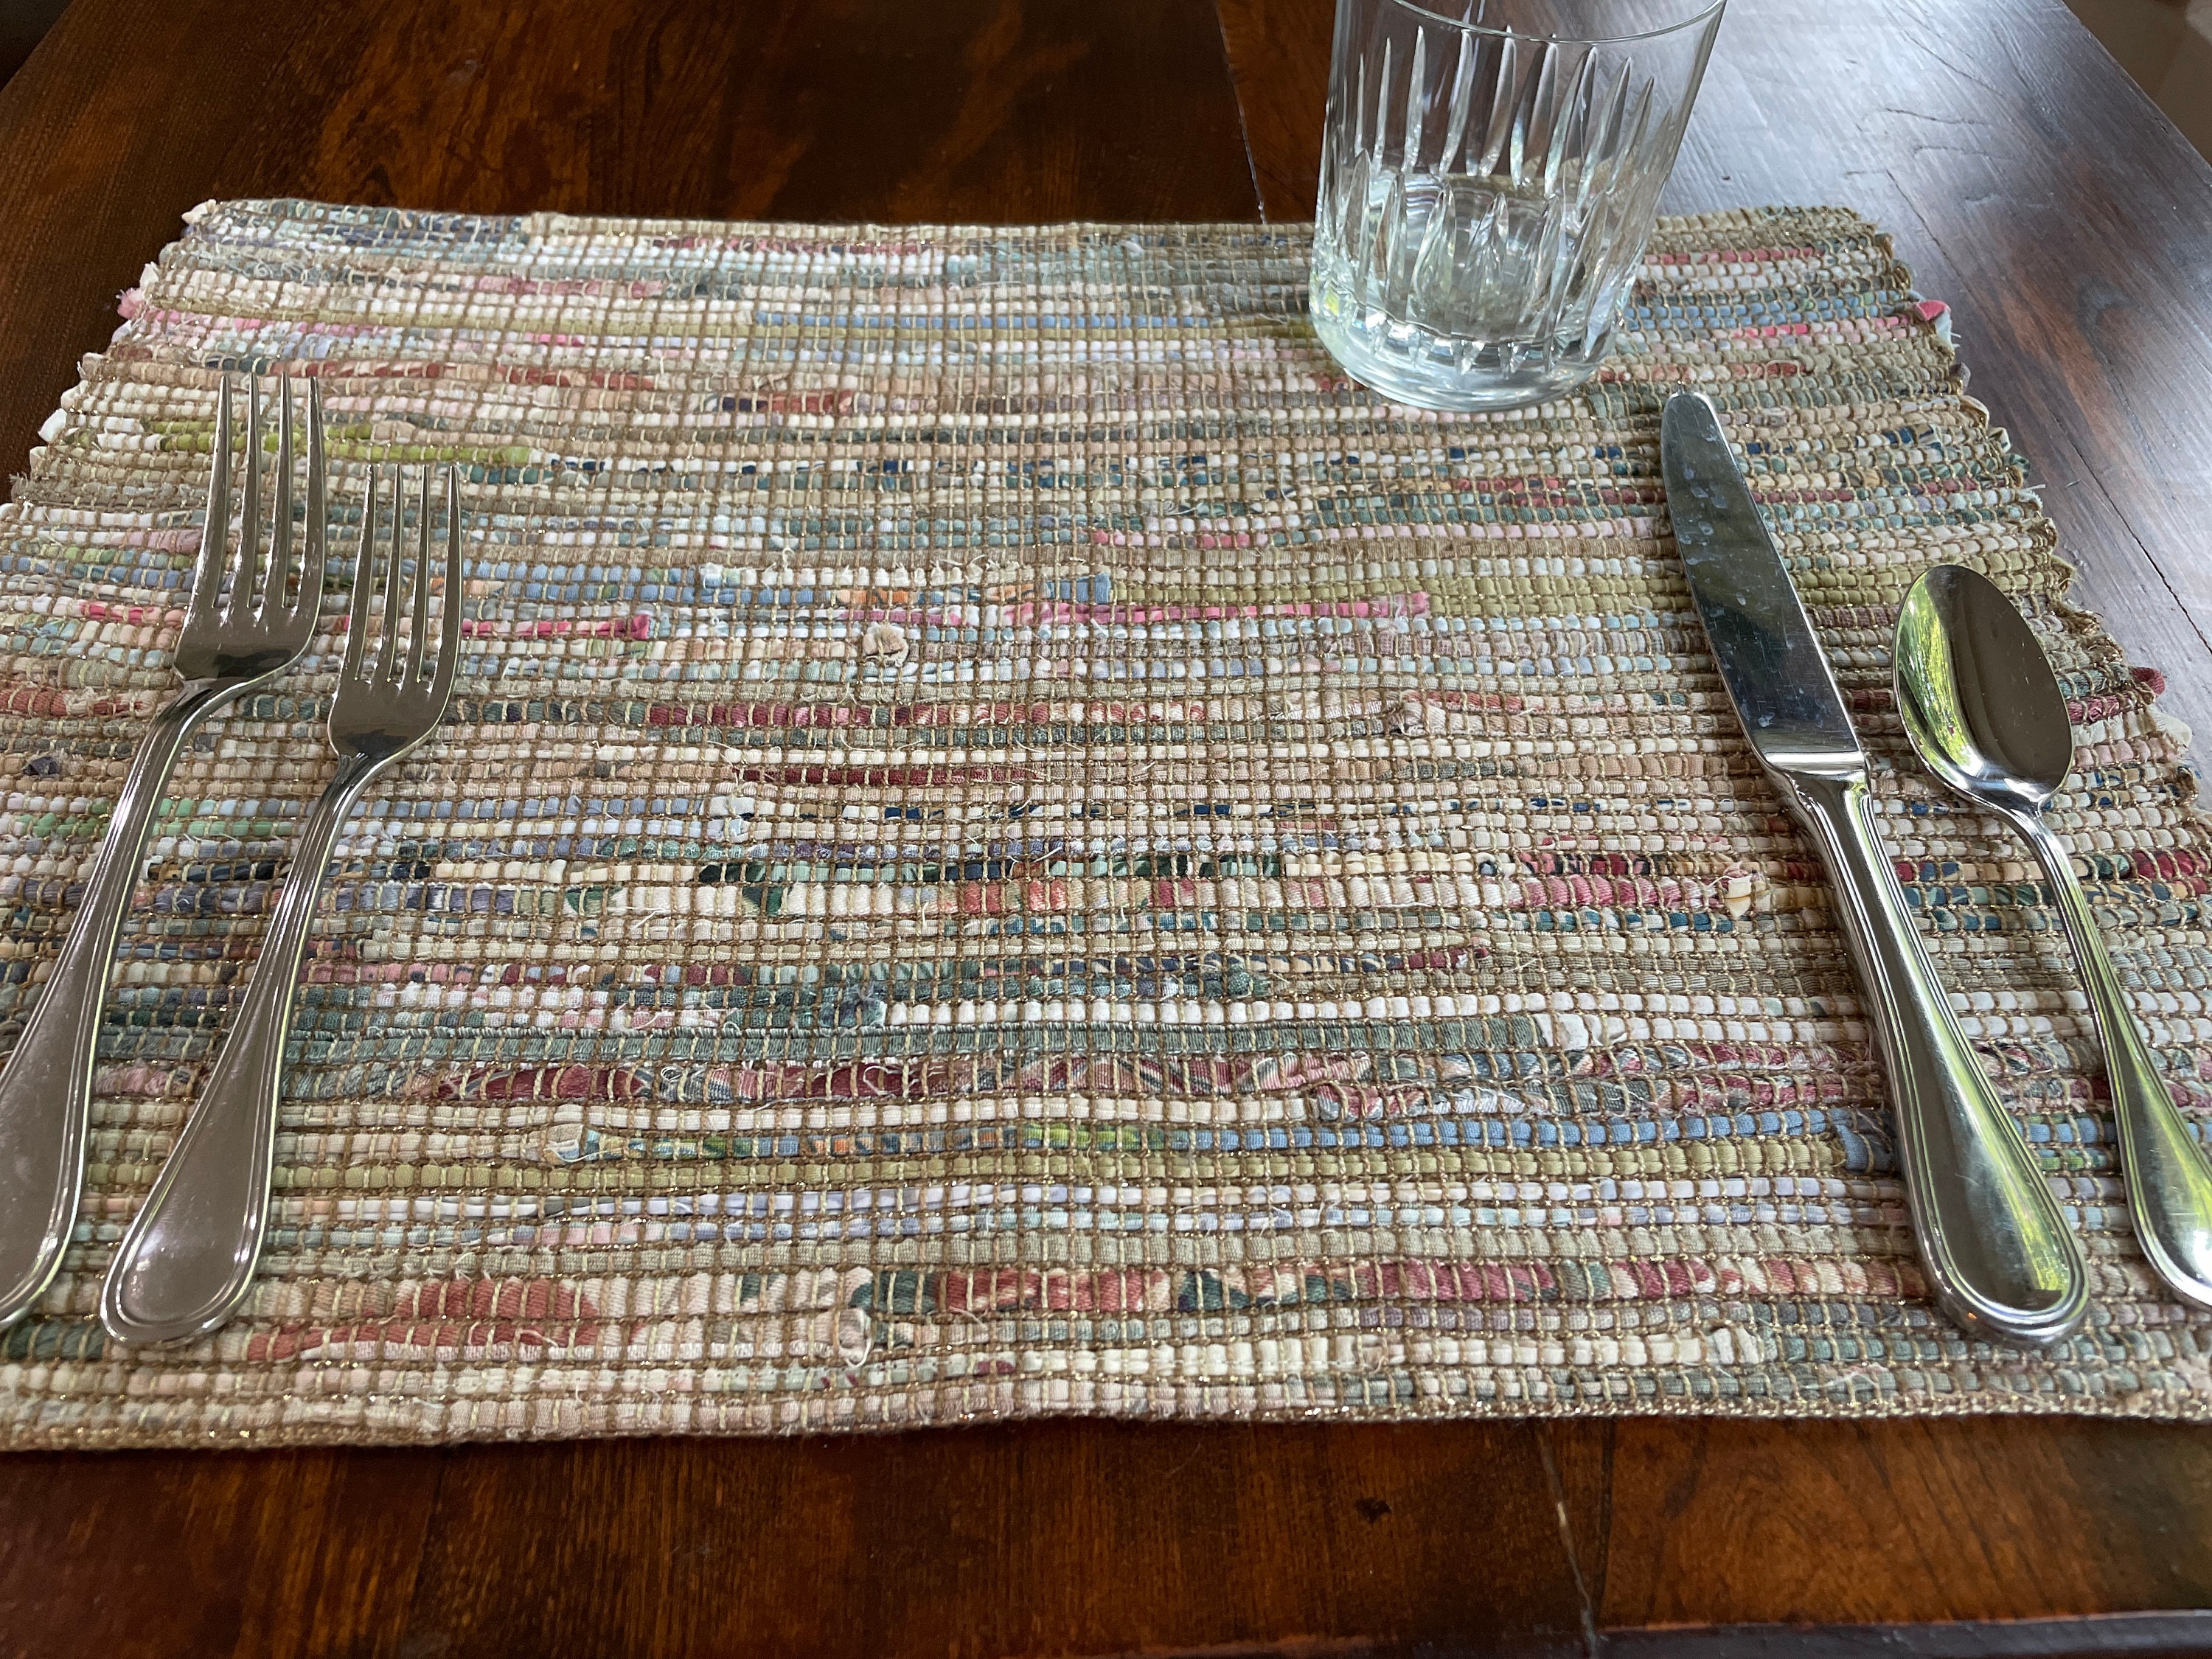 Protecttable Clear placemats - set of 6 pieces